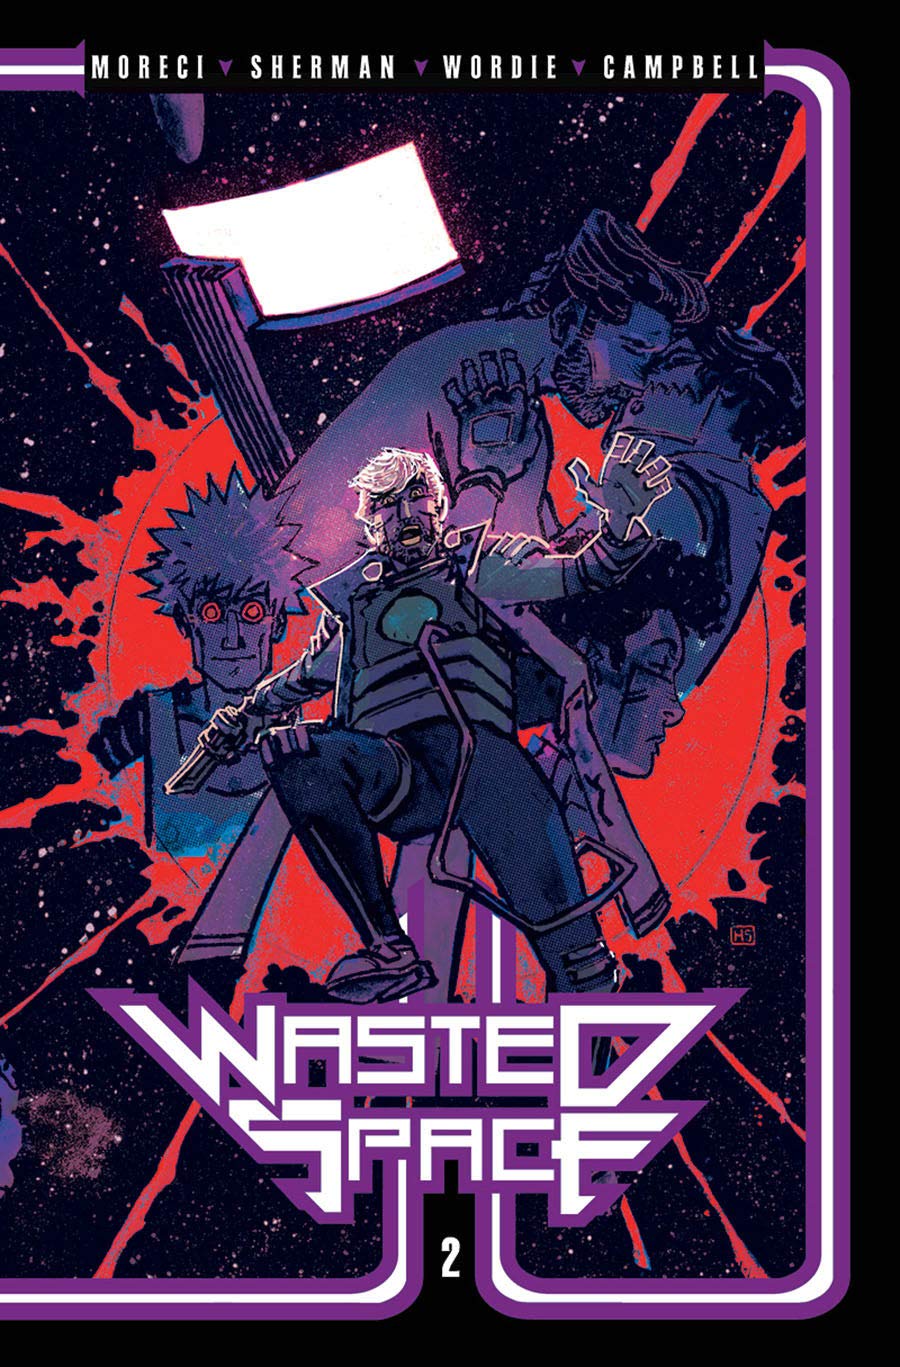 Best Comics of 2019: Wasted Space